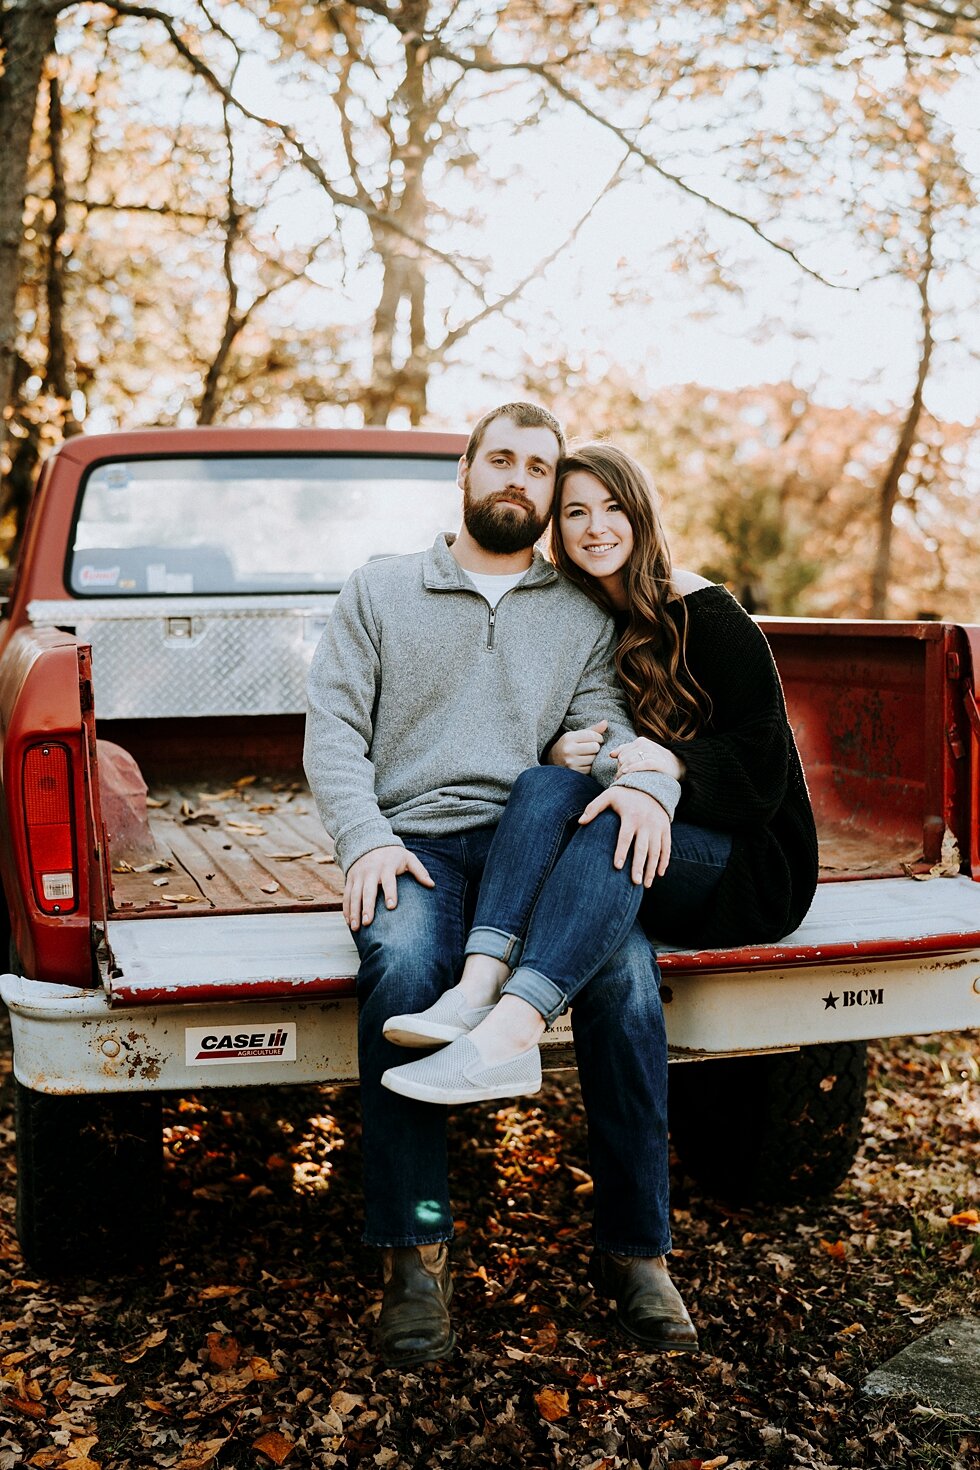  This cute couple plans to fix up this truck for their getaway car after their wedding! How sweet! #engagementgoals #engagementphotographer #engaged #outdoorengagement #kentuckyphotographer #indianaphotographer #louisvillephotographer #engagementphot